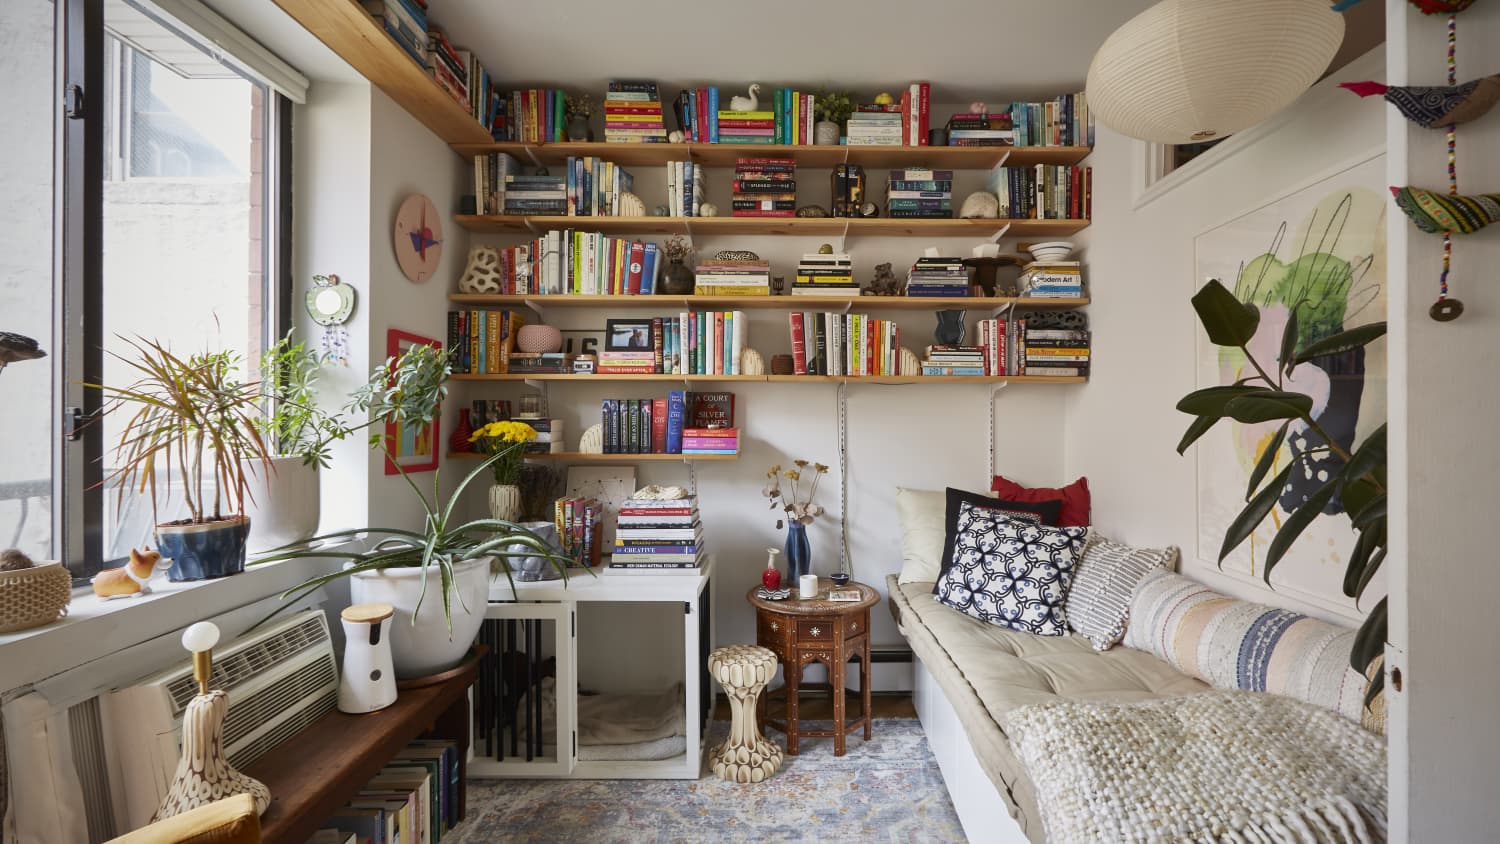 450-Square-Foot NYC Rental With Budget Book Storage Solutions